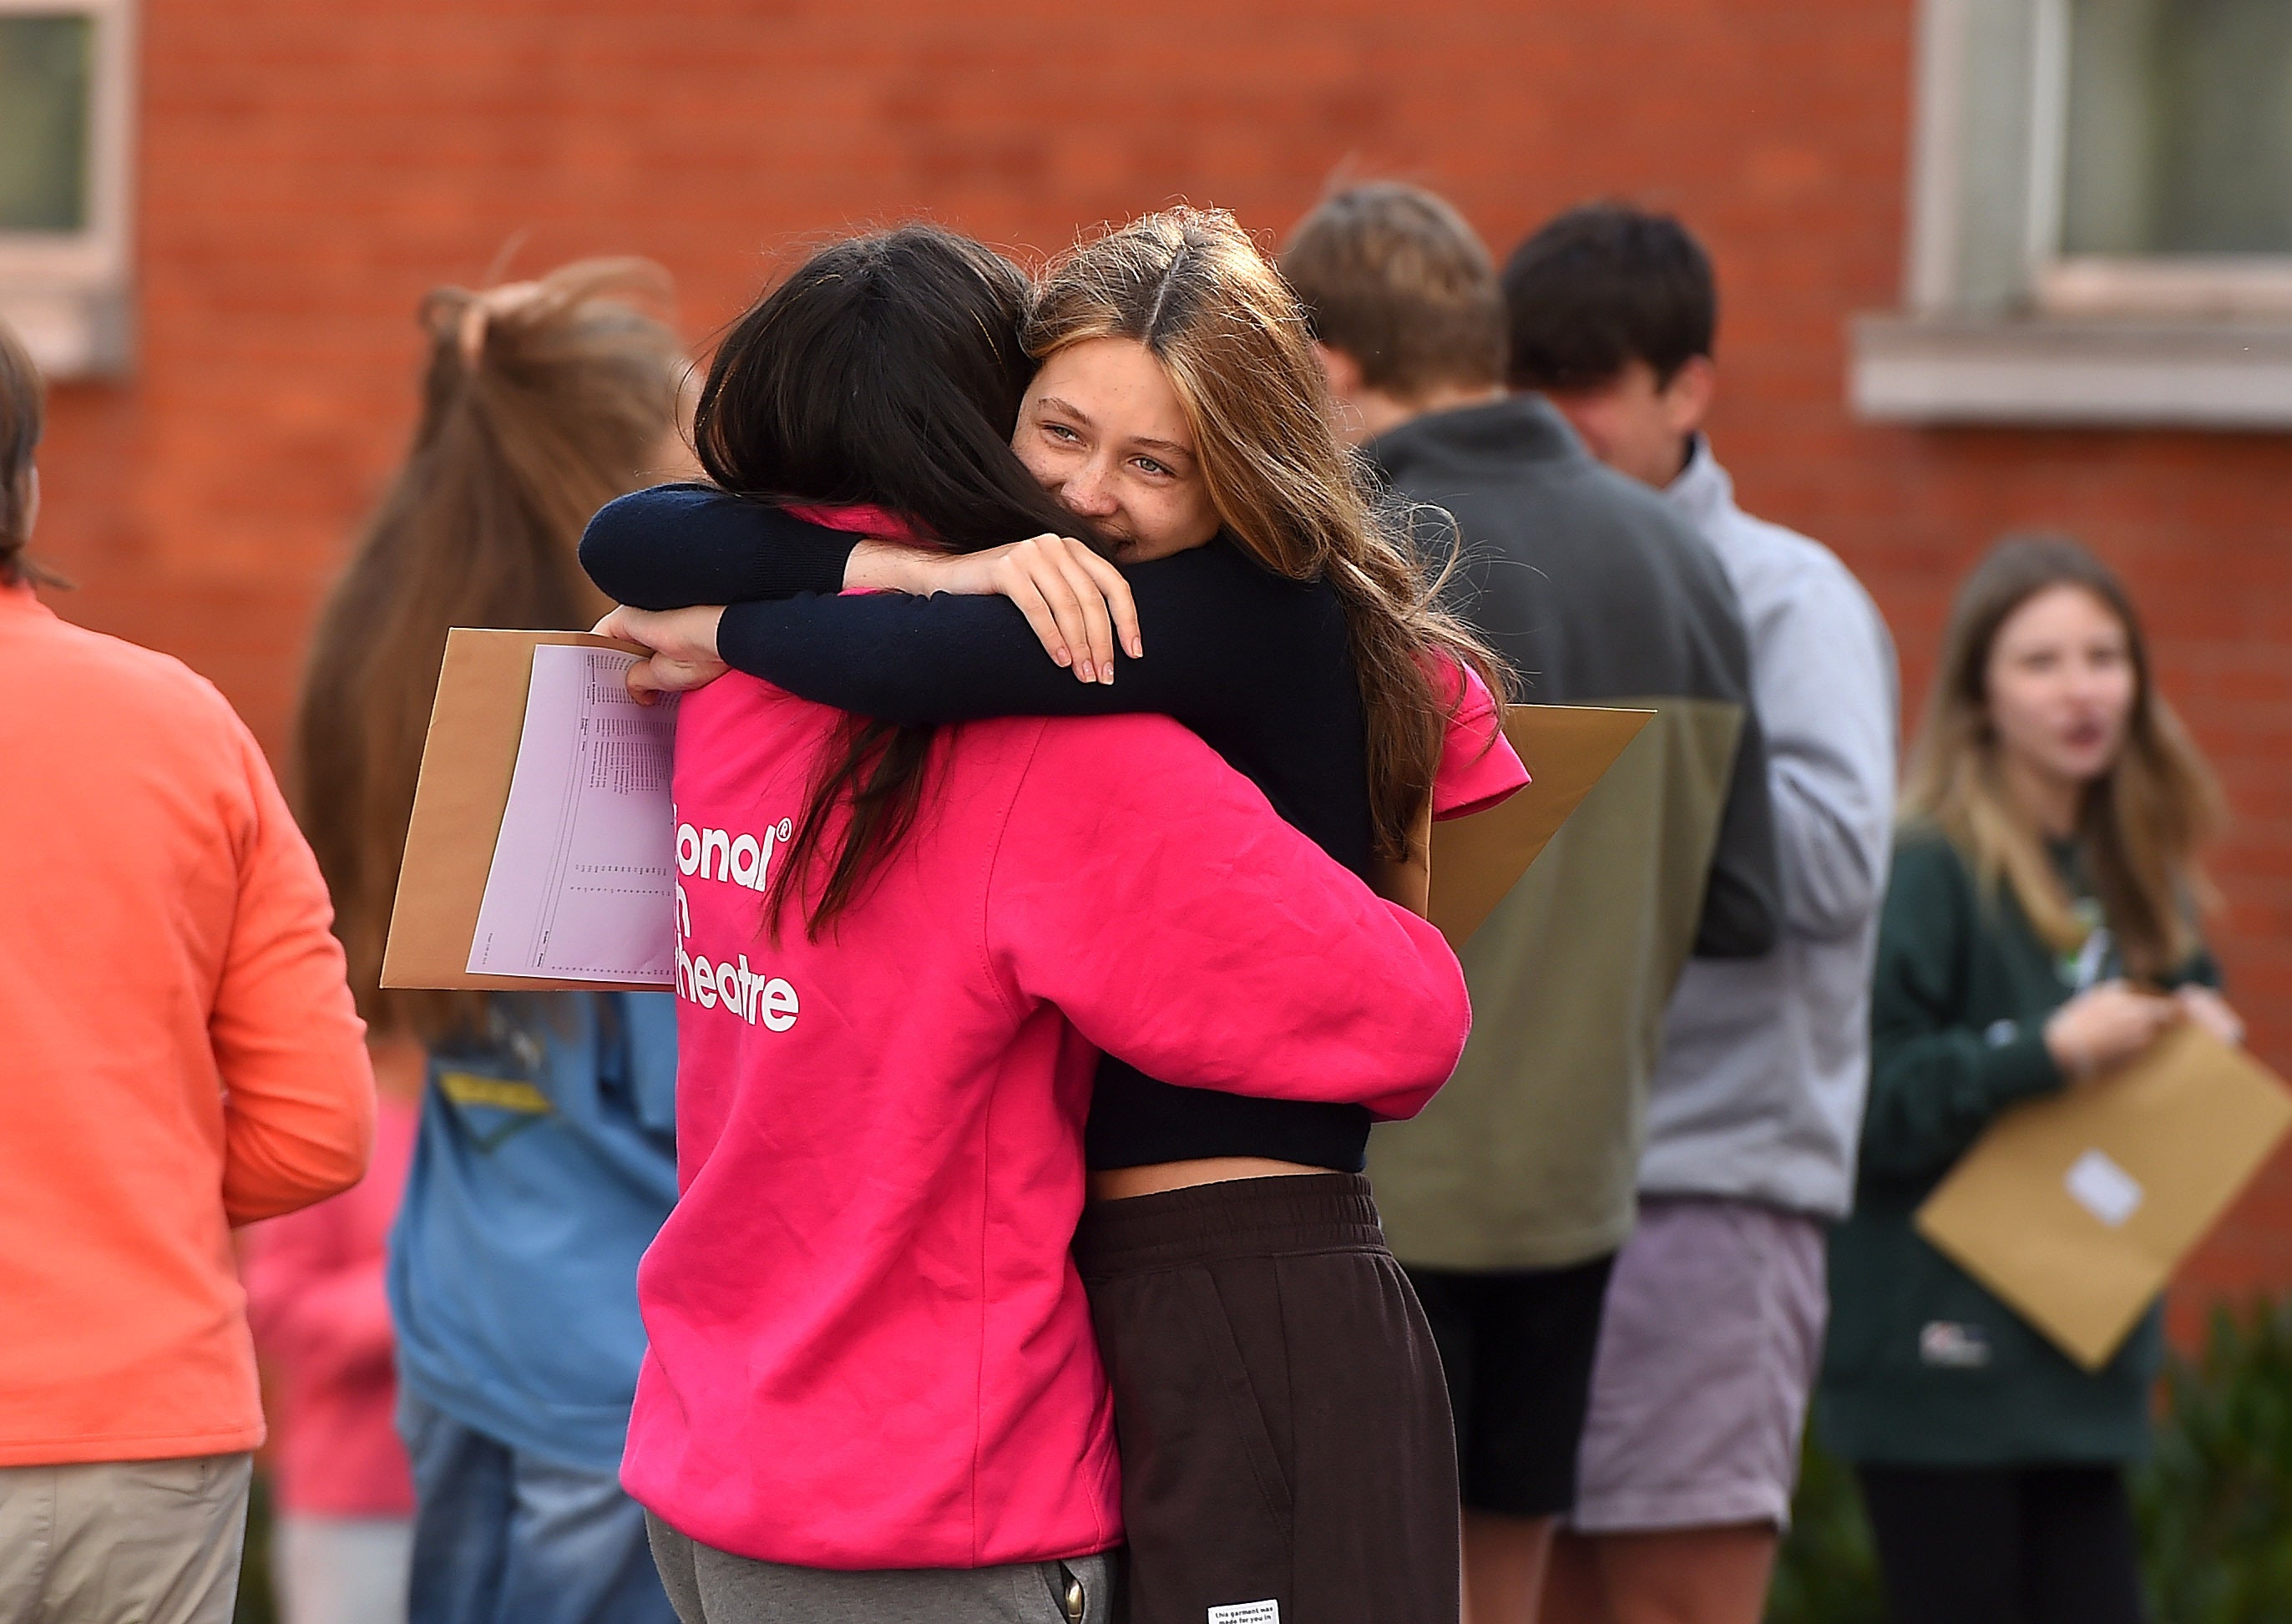 Hundreds of thousands of pupils received GCSE results on Thursday